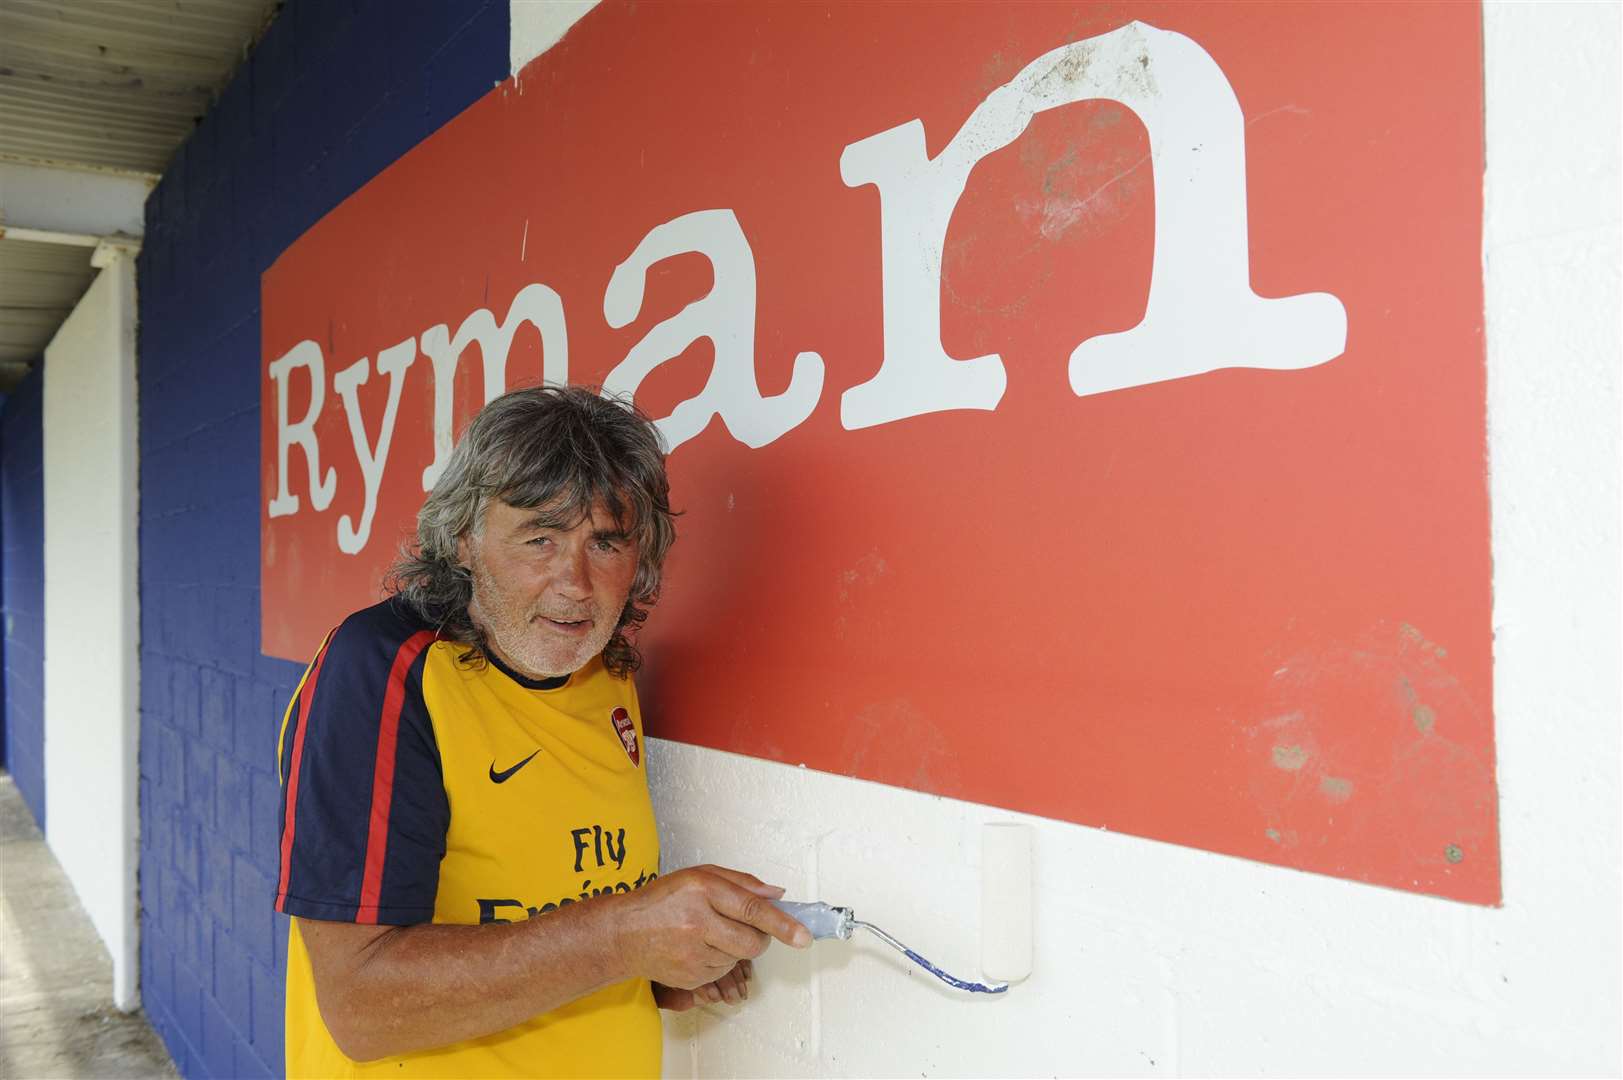 Jim Bubb spent much of his time at Herne Bay Football Club painting dressing rooms, fixing advertising boards and supporting the team on match days